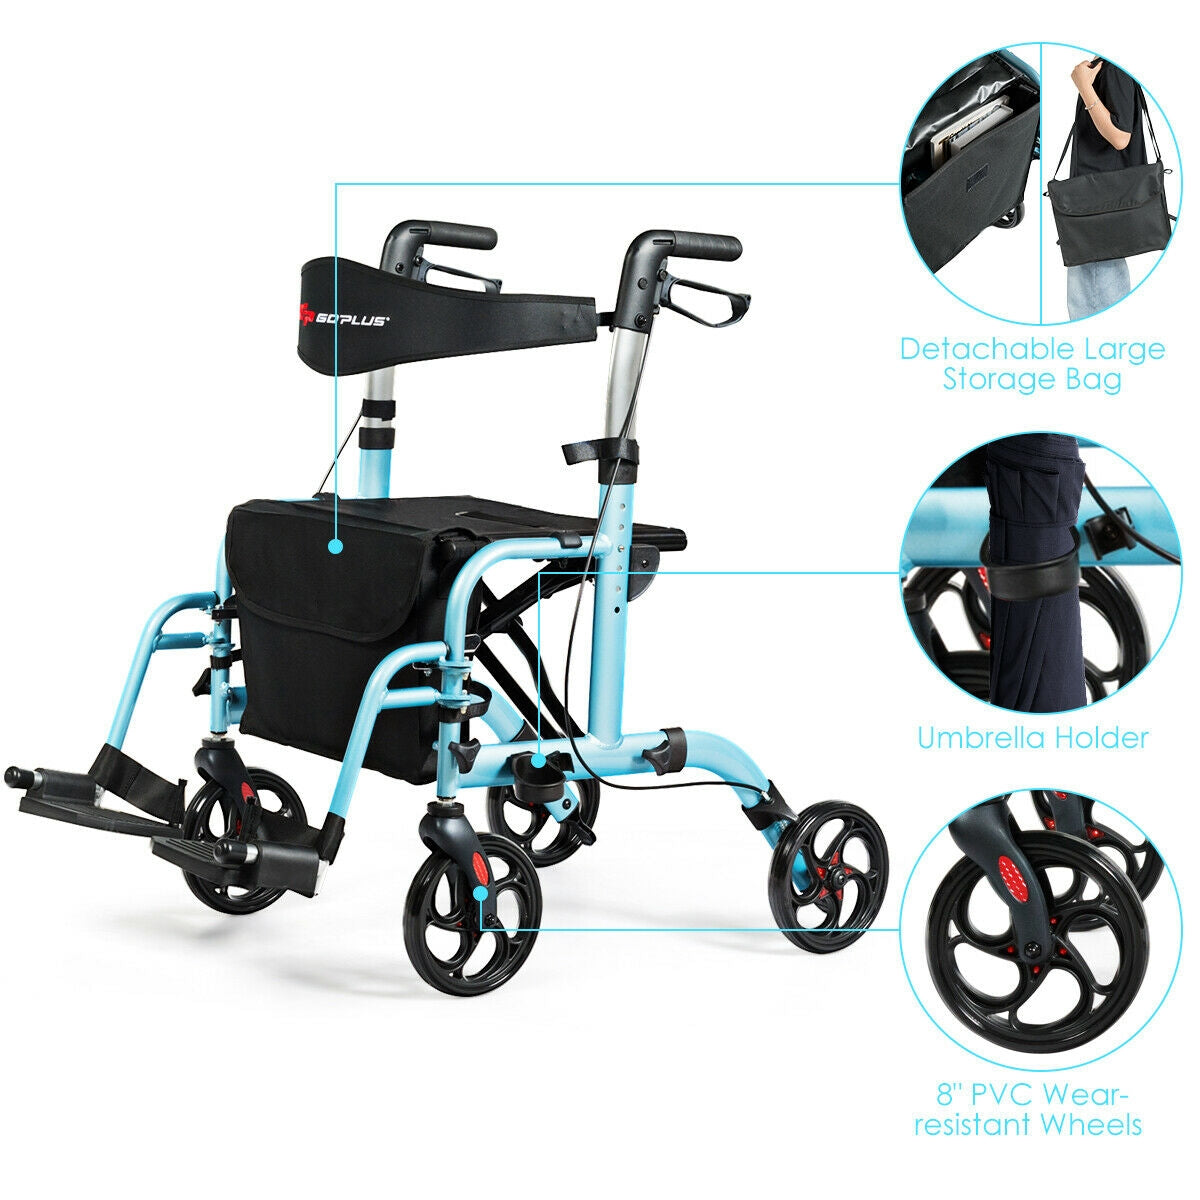 2-in-1 Adjustable Folding Handle  Mobility Rollator Walker with Storage Space